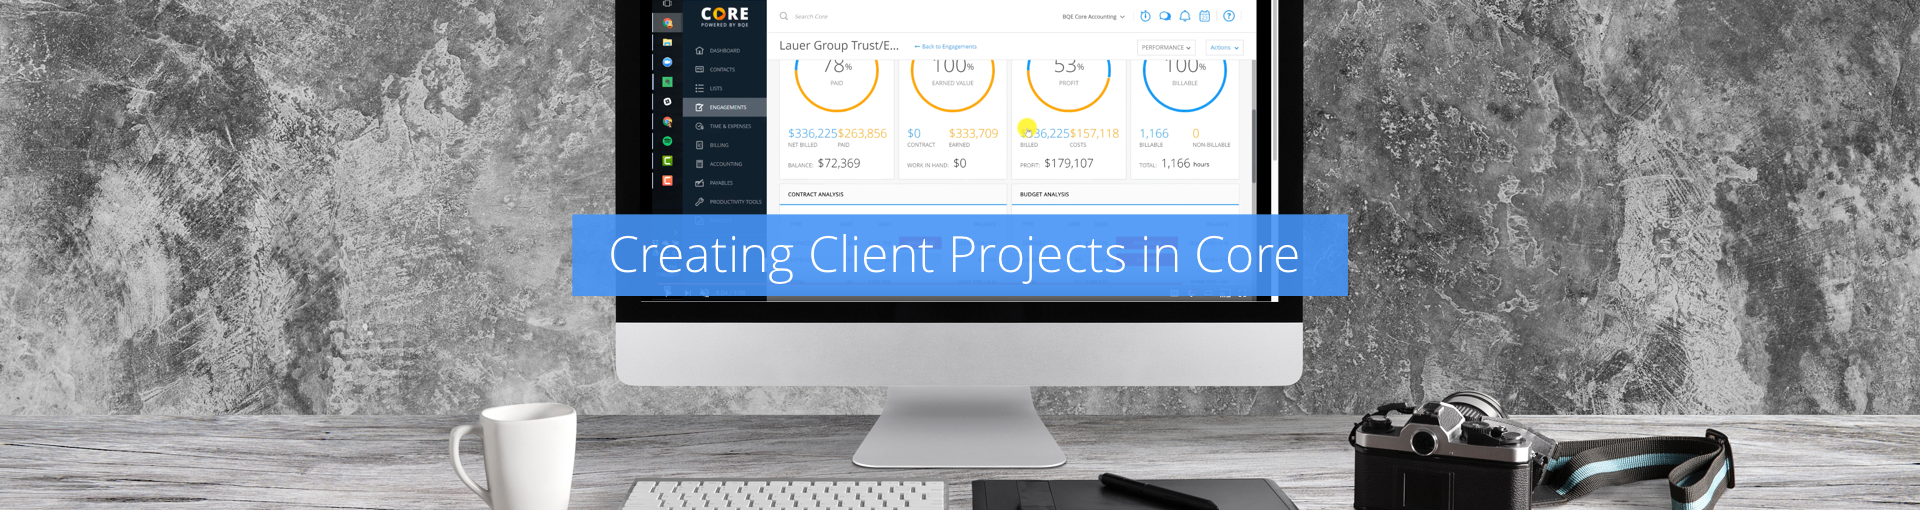 Creating Client Projects in CORE Featured Image